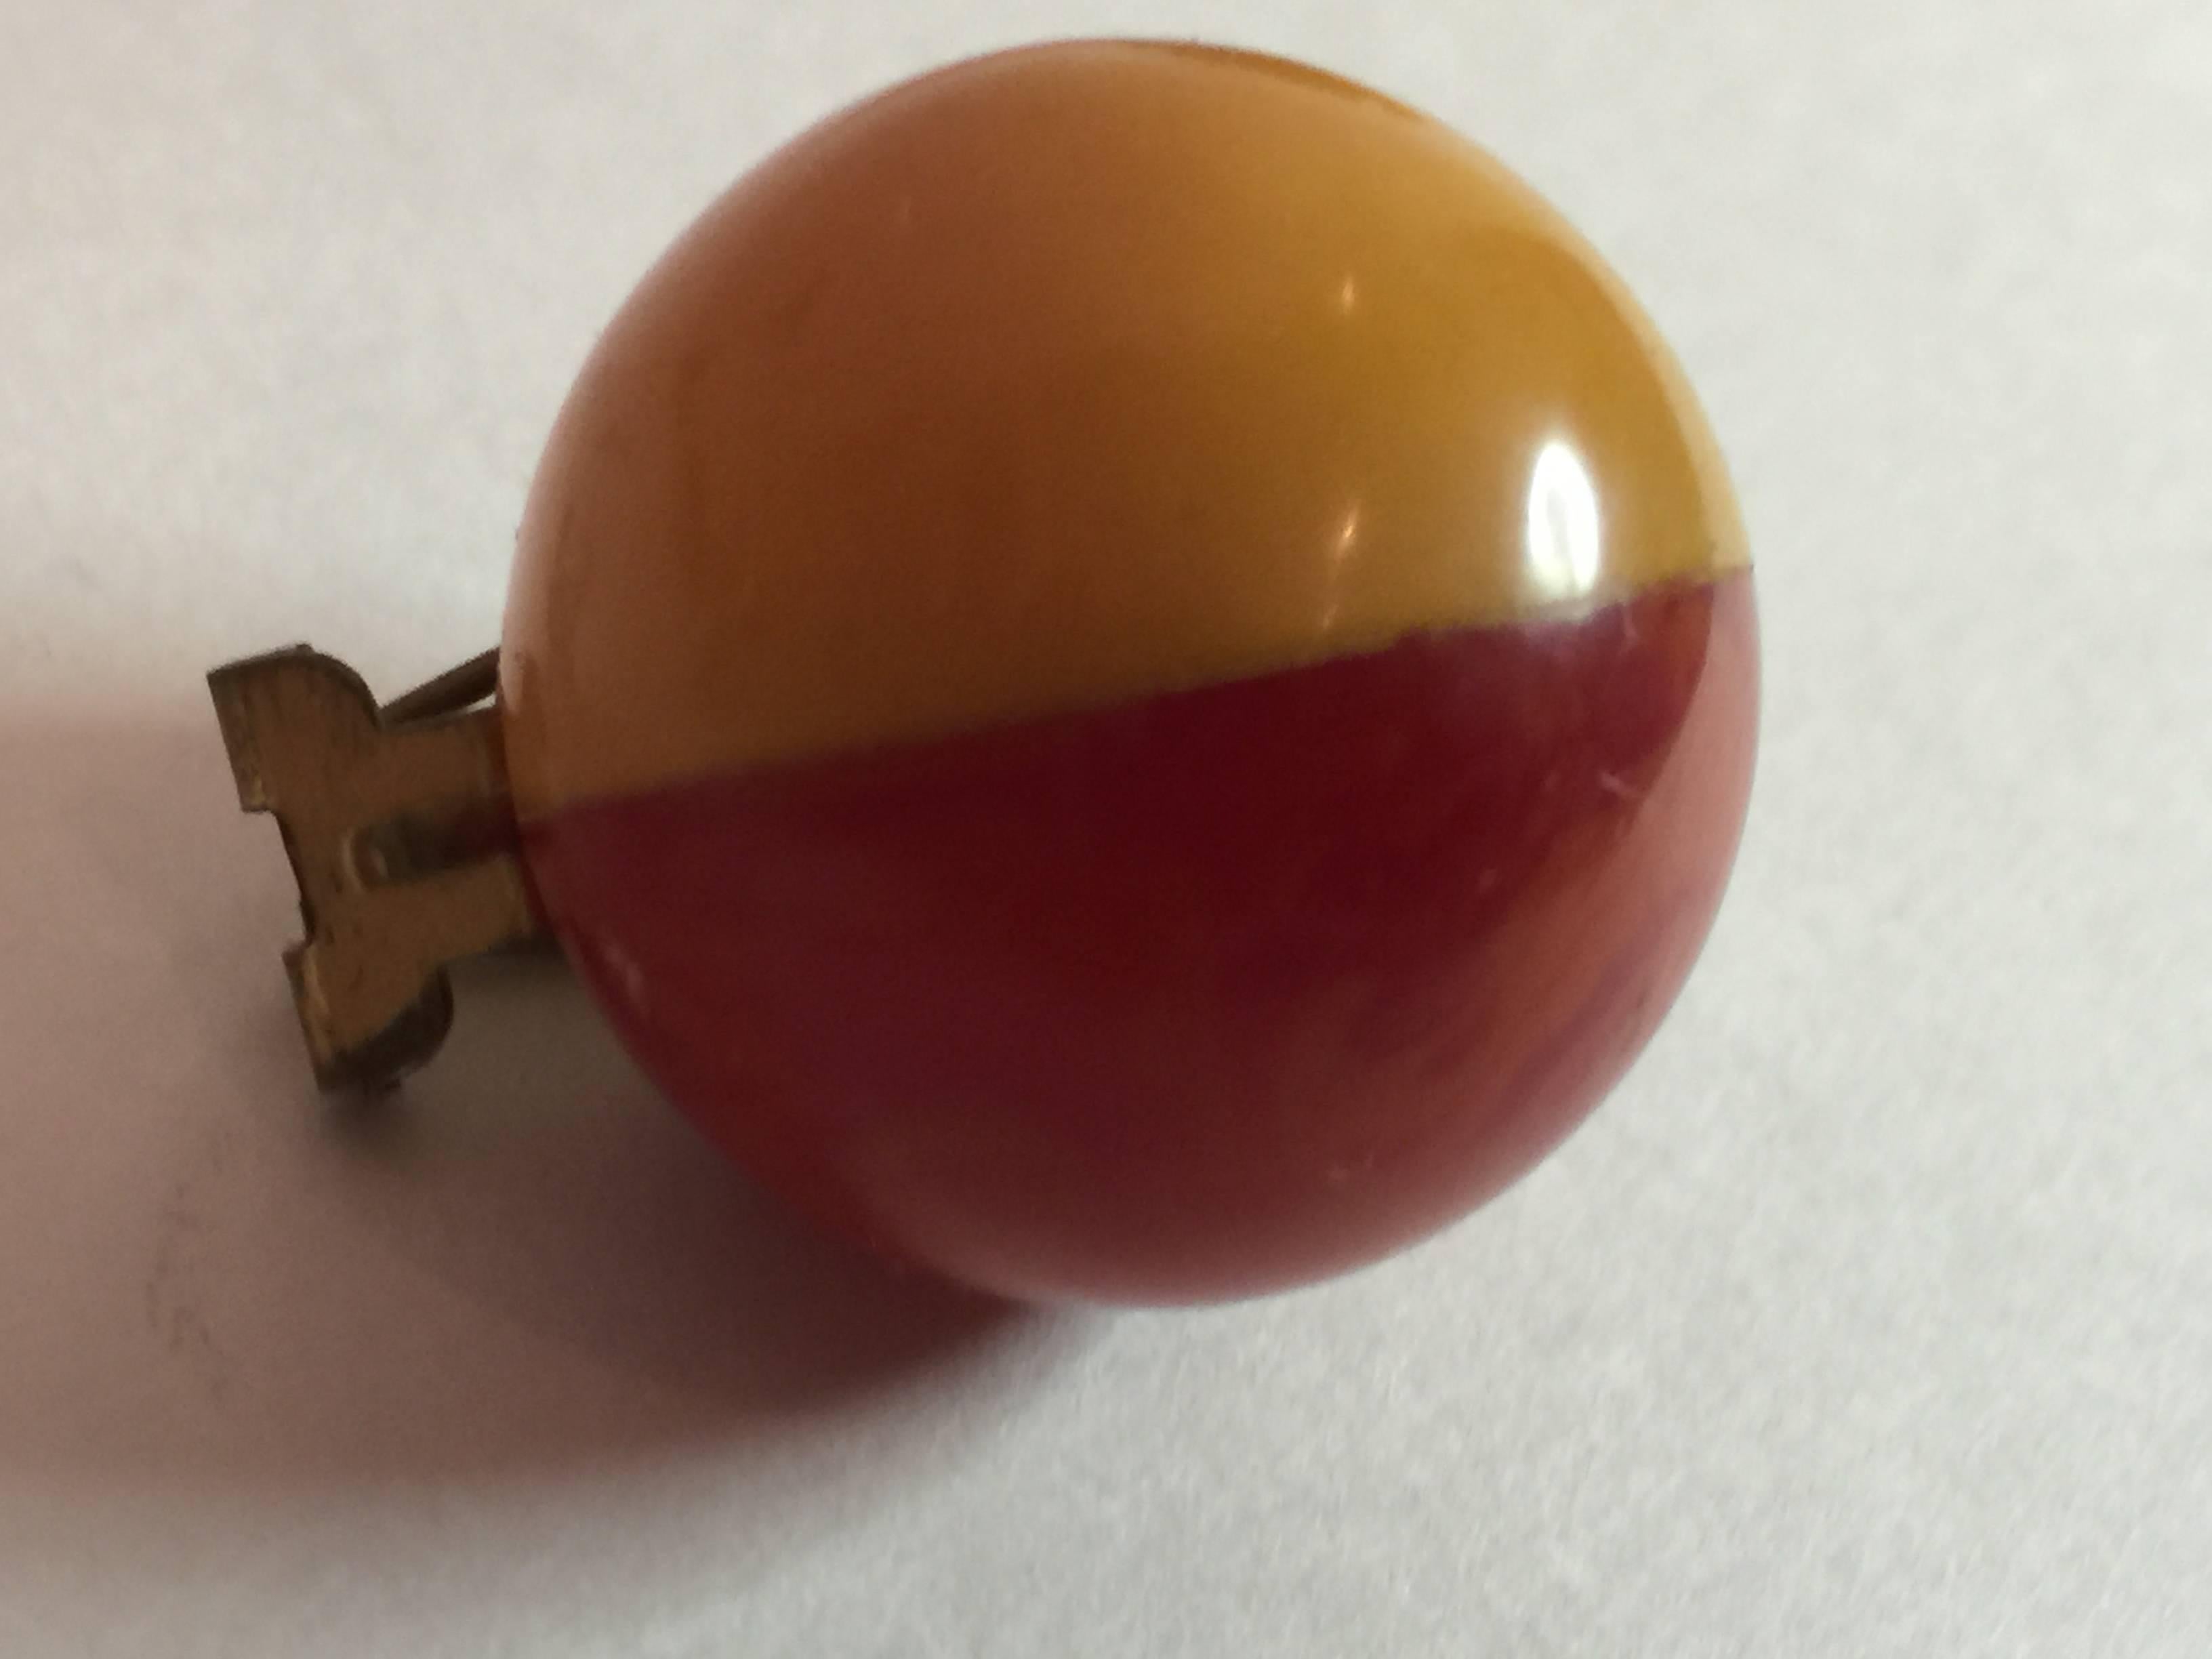 These 1930s Unusual Two Color Laminated Bakelite 3-D Circular Sphere Red & Cream Clip Earrings are interesting in that the hardware the clip on mechanism that seems original and is extant and functions perfectly, ressembles French earring hardware